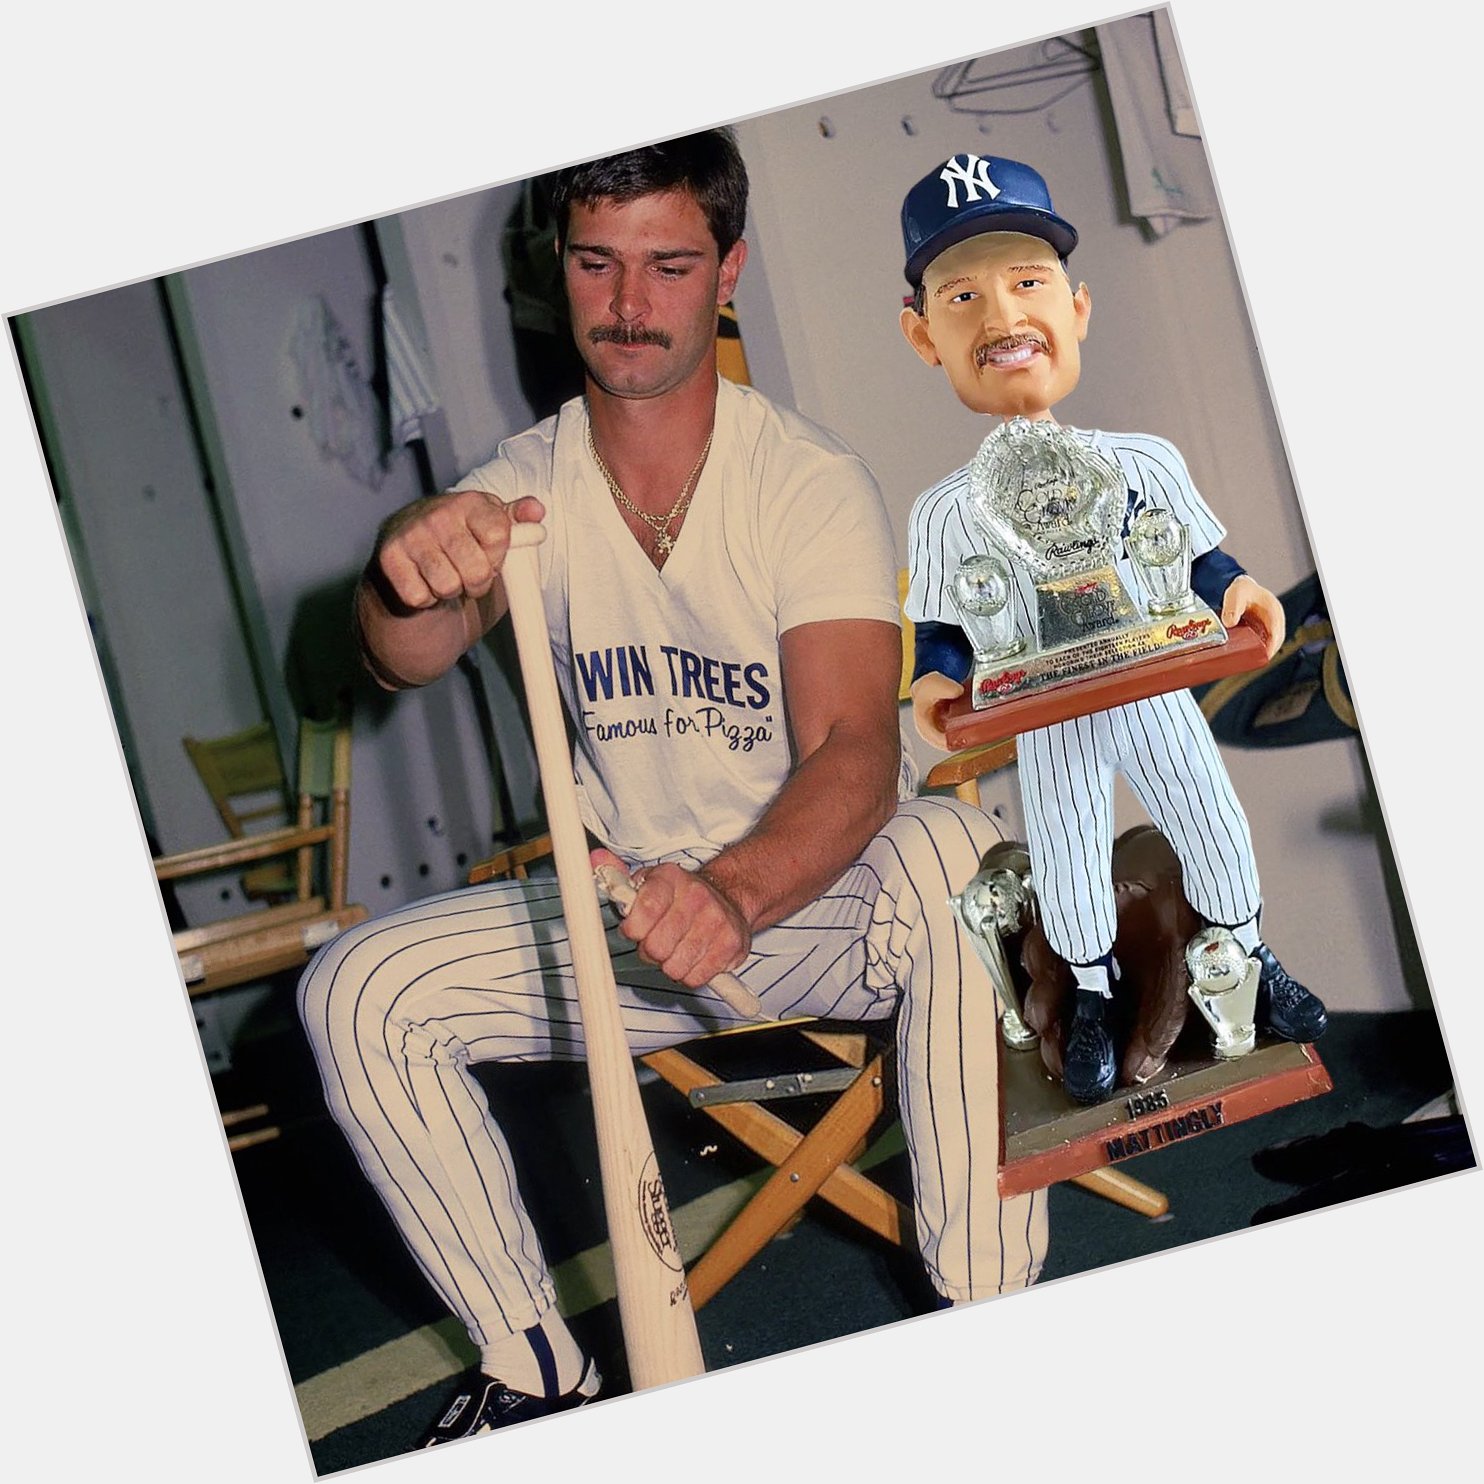 Happy Birthday to a true legend as Don Mattingly turns 62 today.   